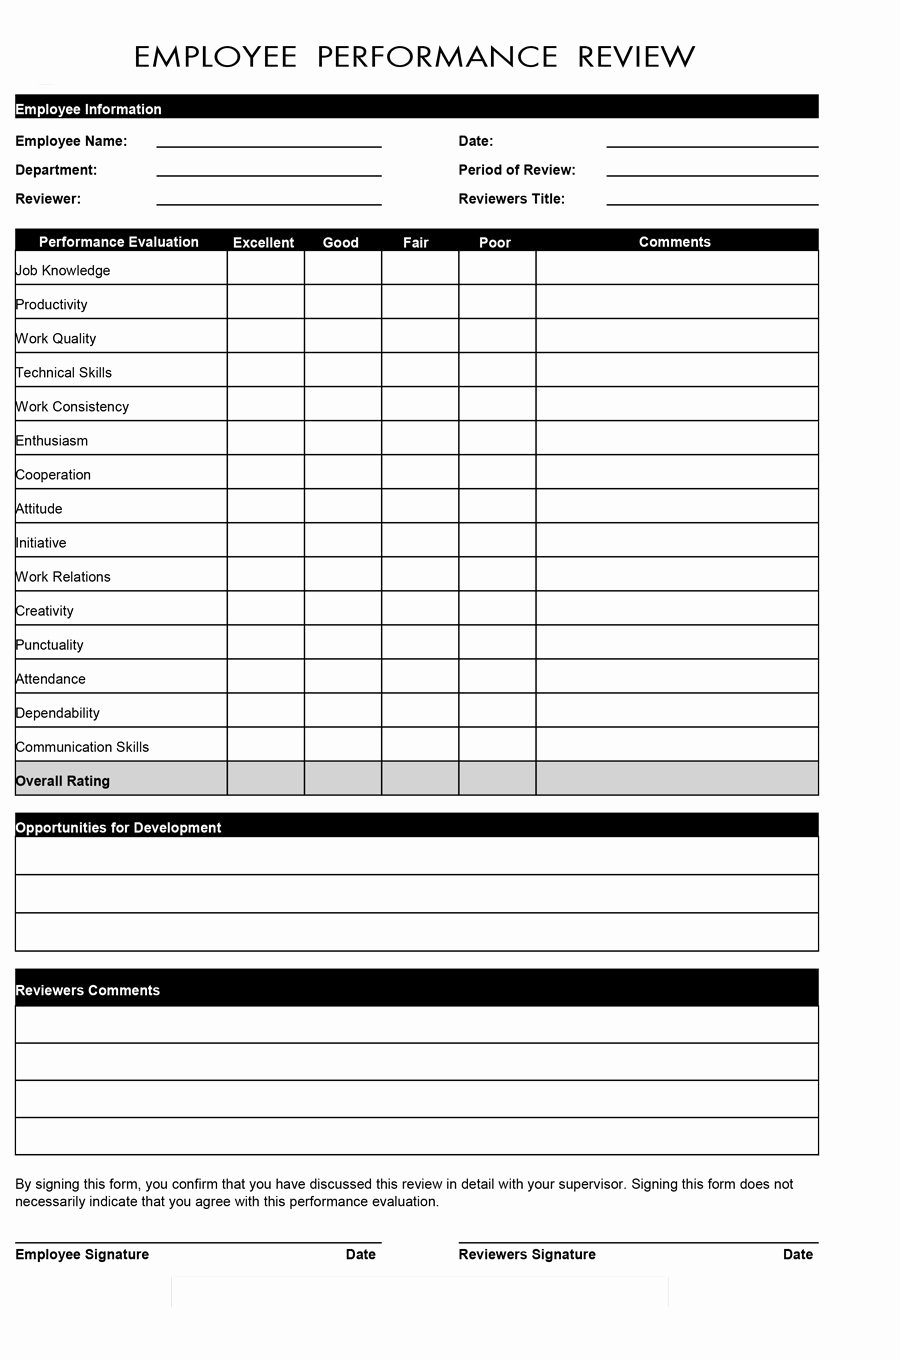 Employee Evaluation form Template Word Fresh 46 Employee Evaluation forms &amp; Performance Review Examples